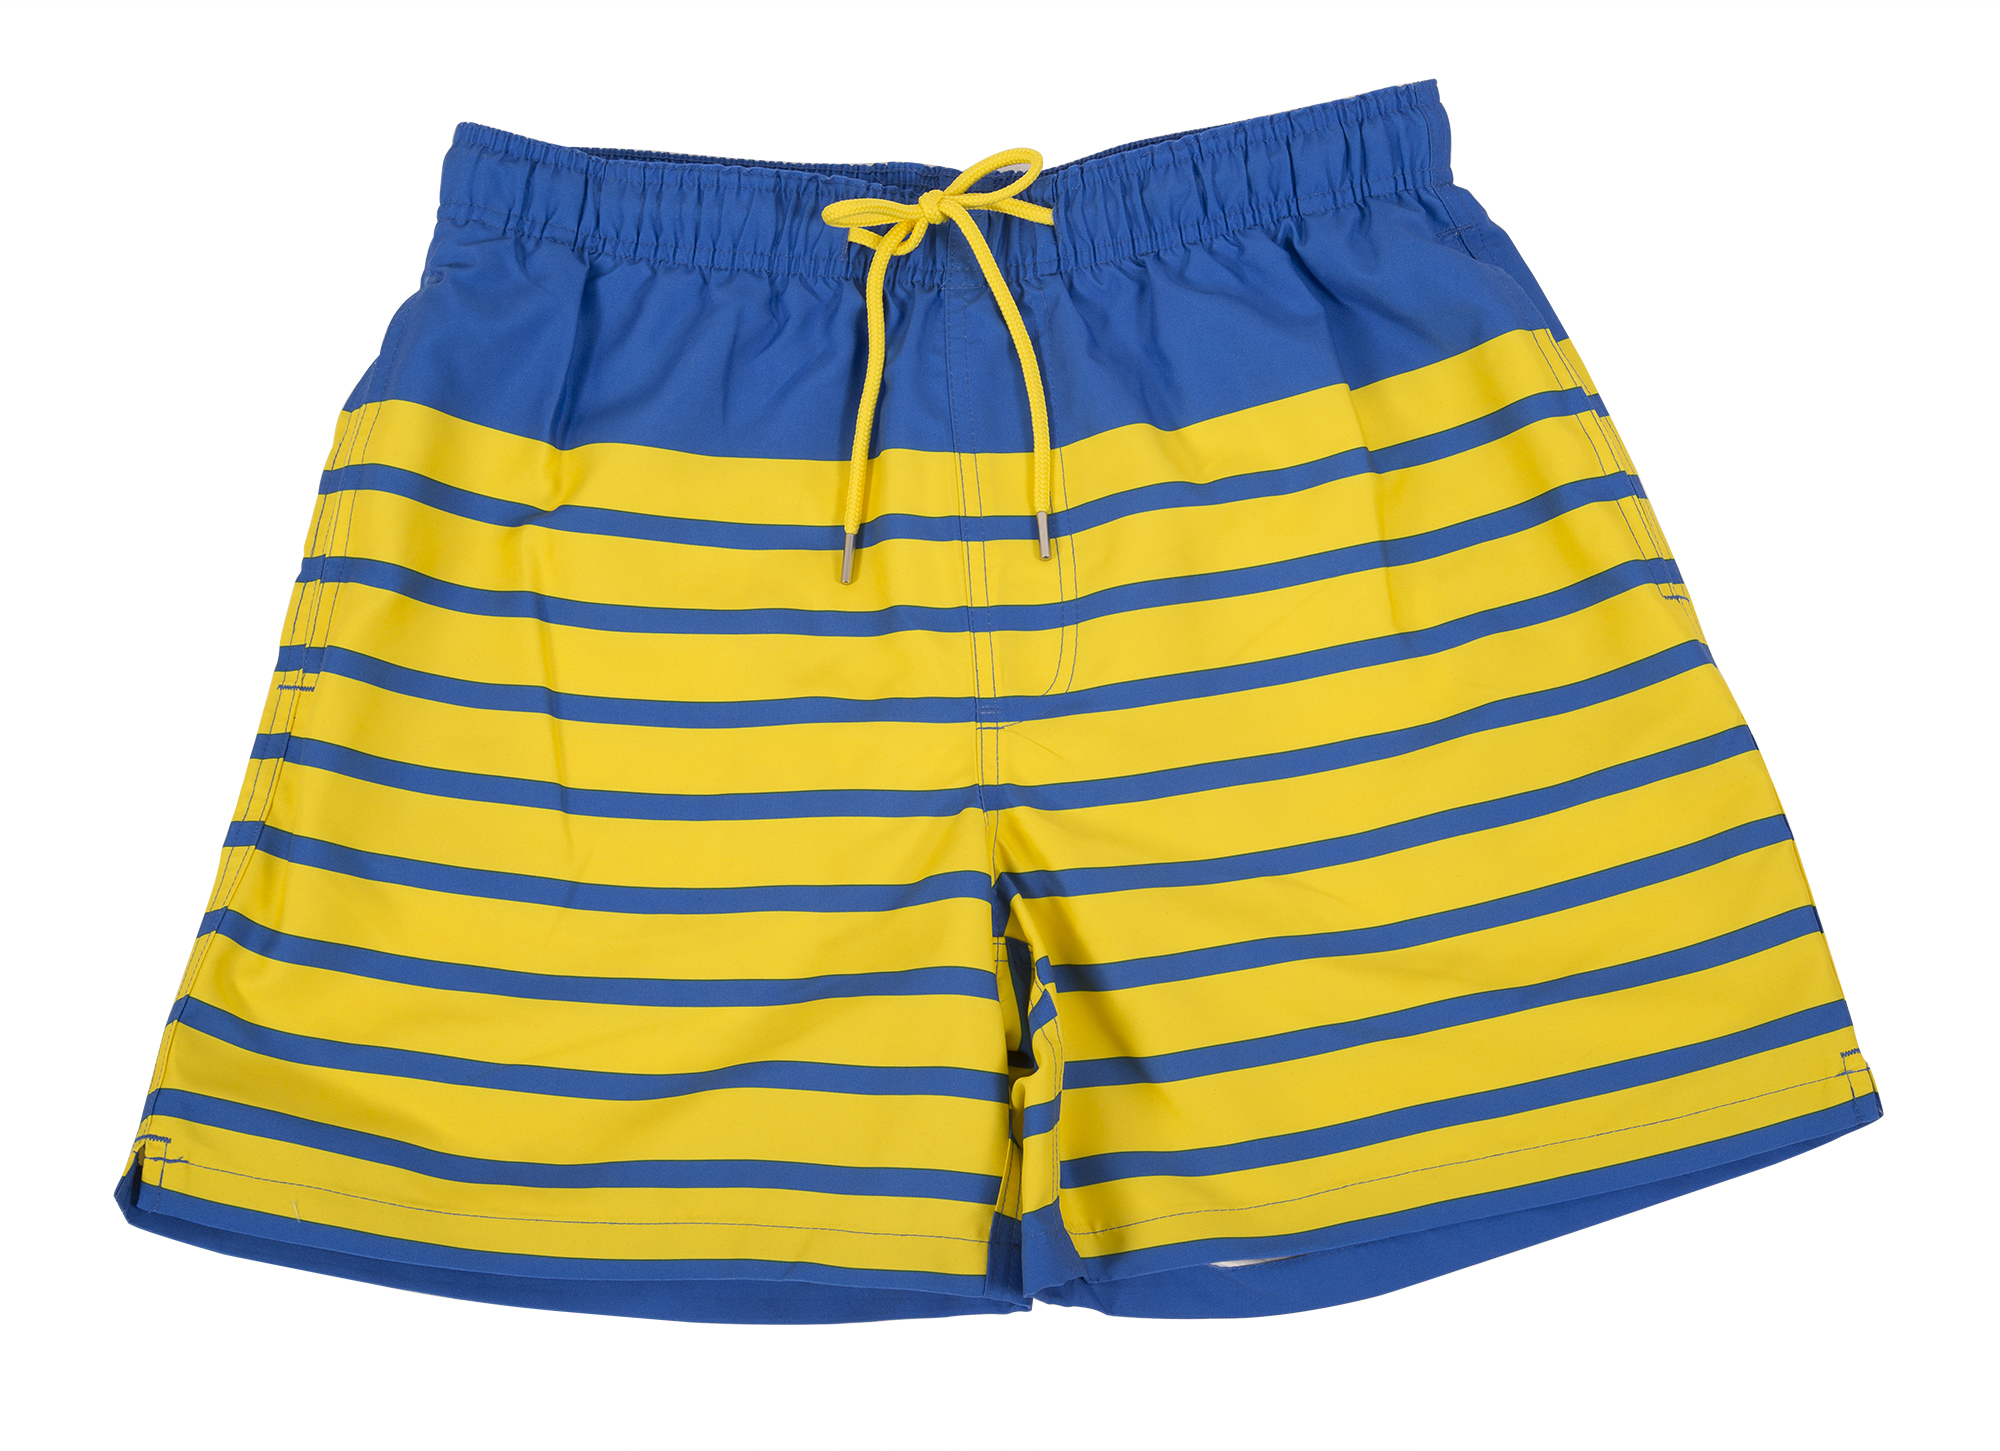 Southern Tide &quot;For Shore Stripe Swim Trunk&quot; in &quot;royal blue and vibrant yellow,&quot; $85 at M. Dumas &amp; Sons